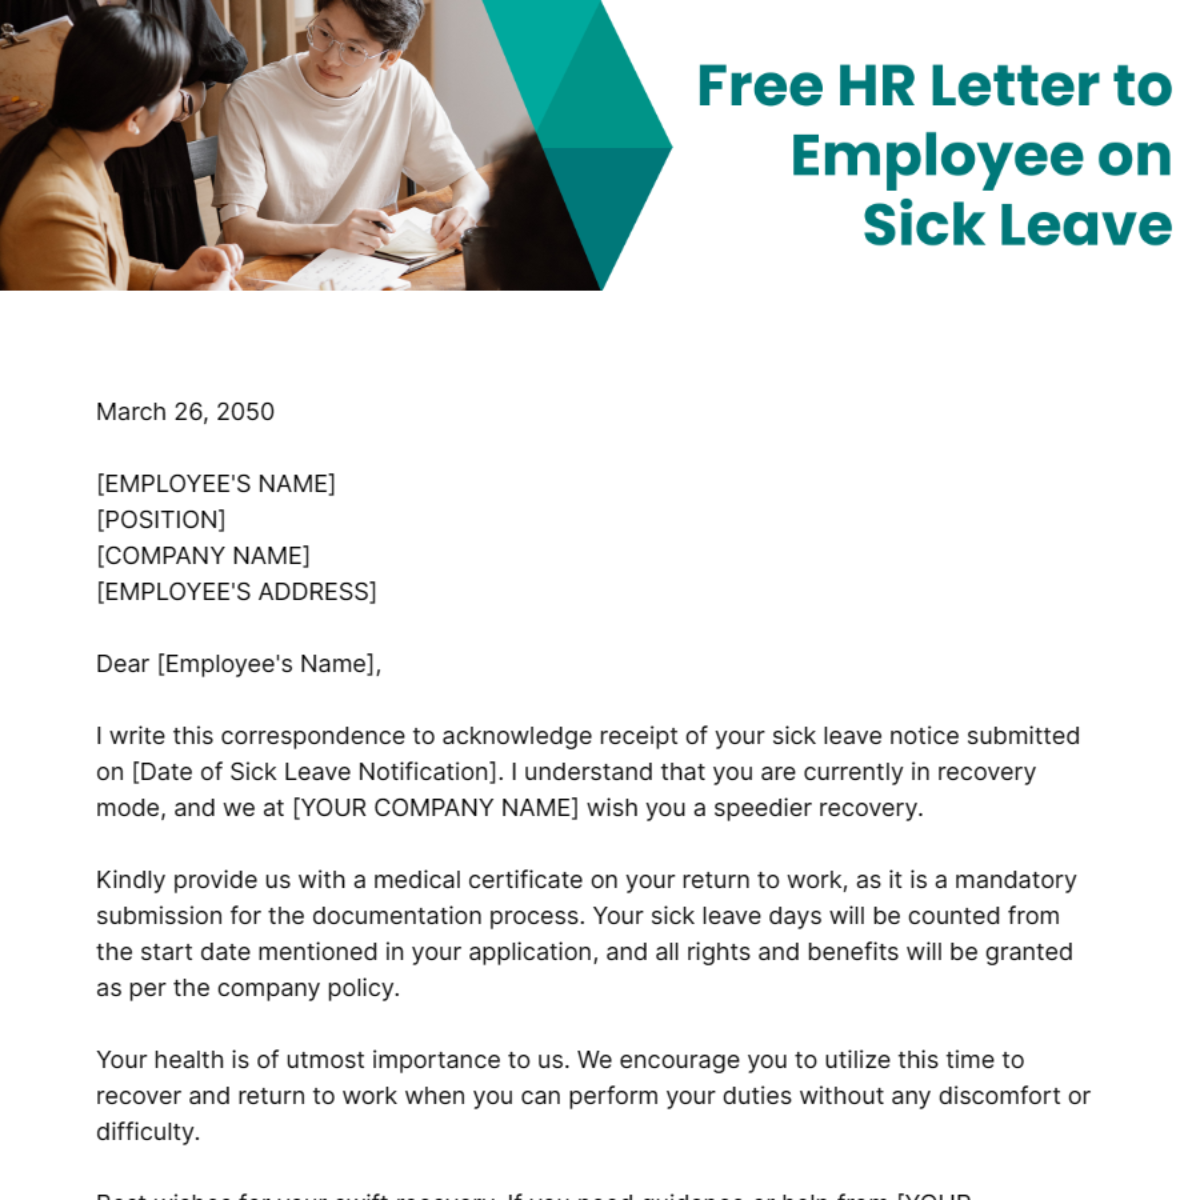 HR Letter to Employee on Sick Leave Template